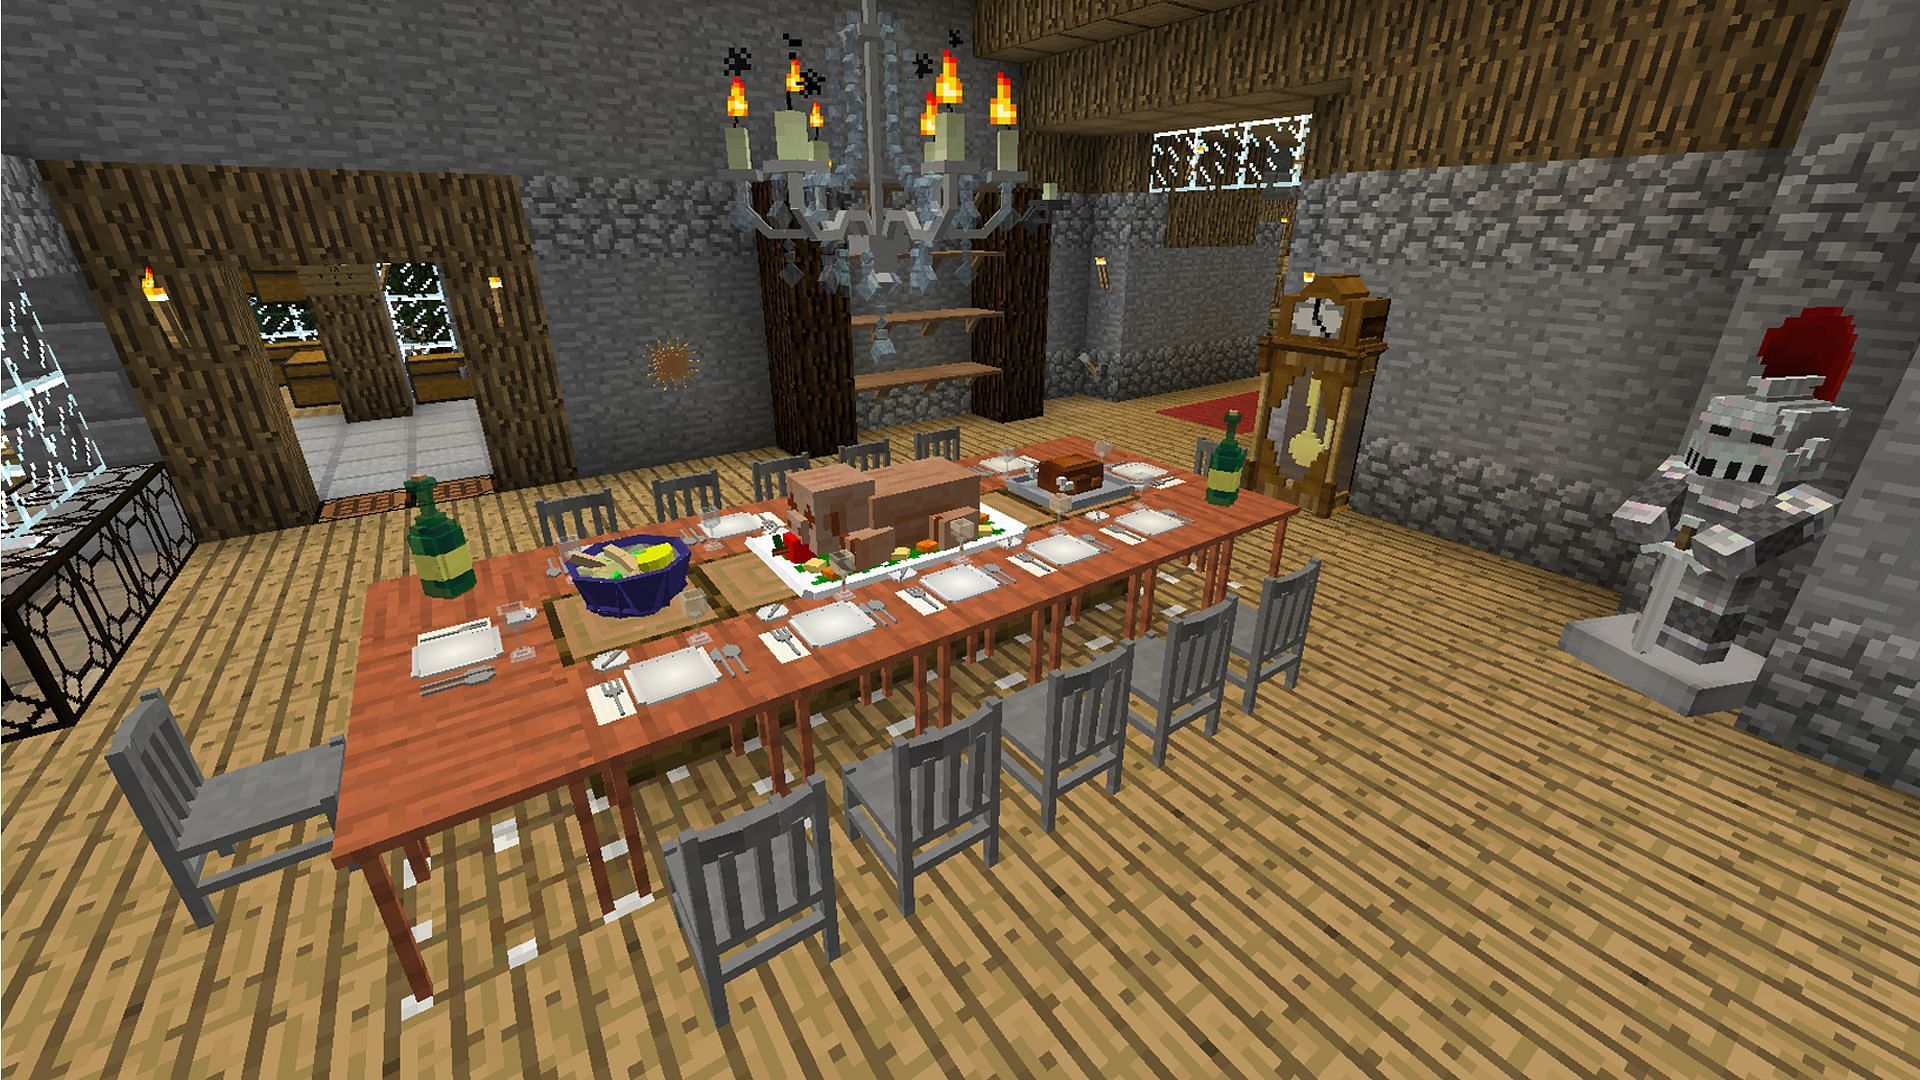 Minecraft furniture mods are a fun way to spice up gameplay (Image via MC mods)